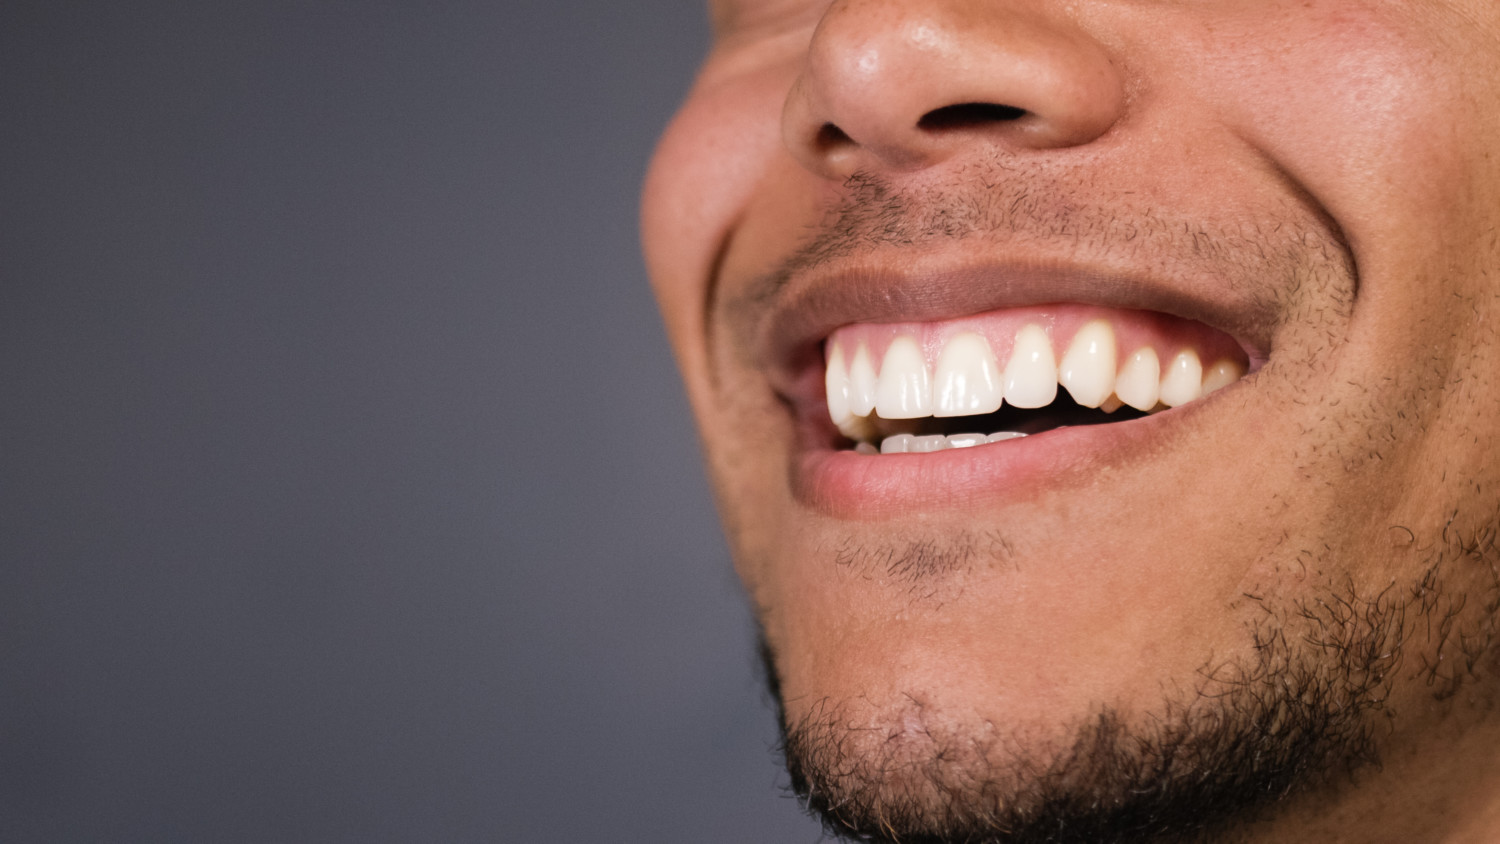 Healthy teeth of a male as he smiles